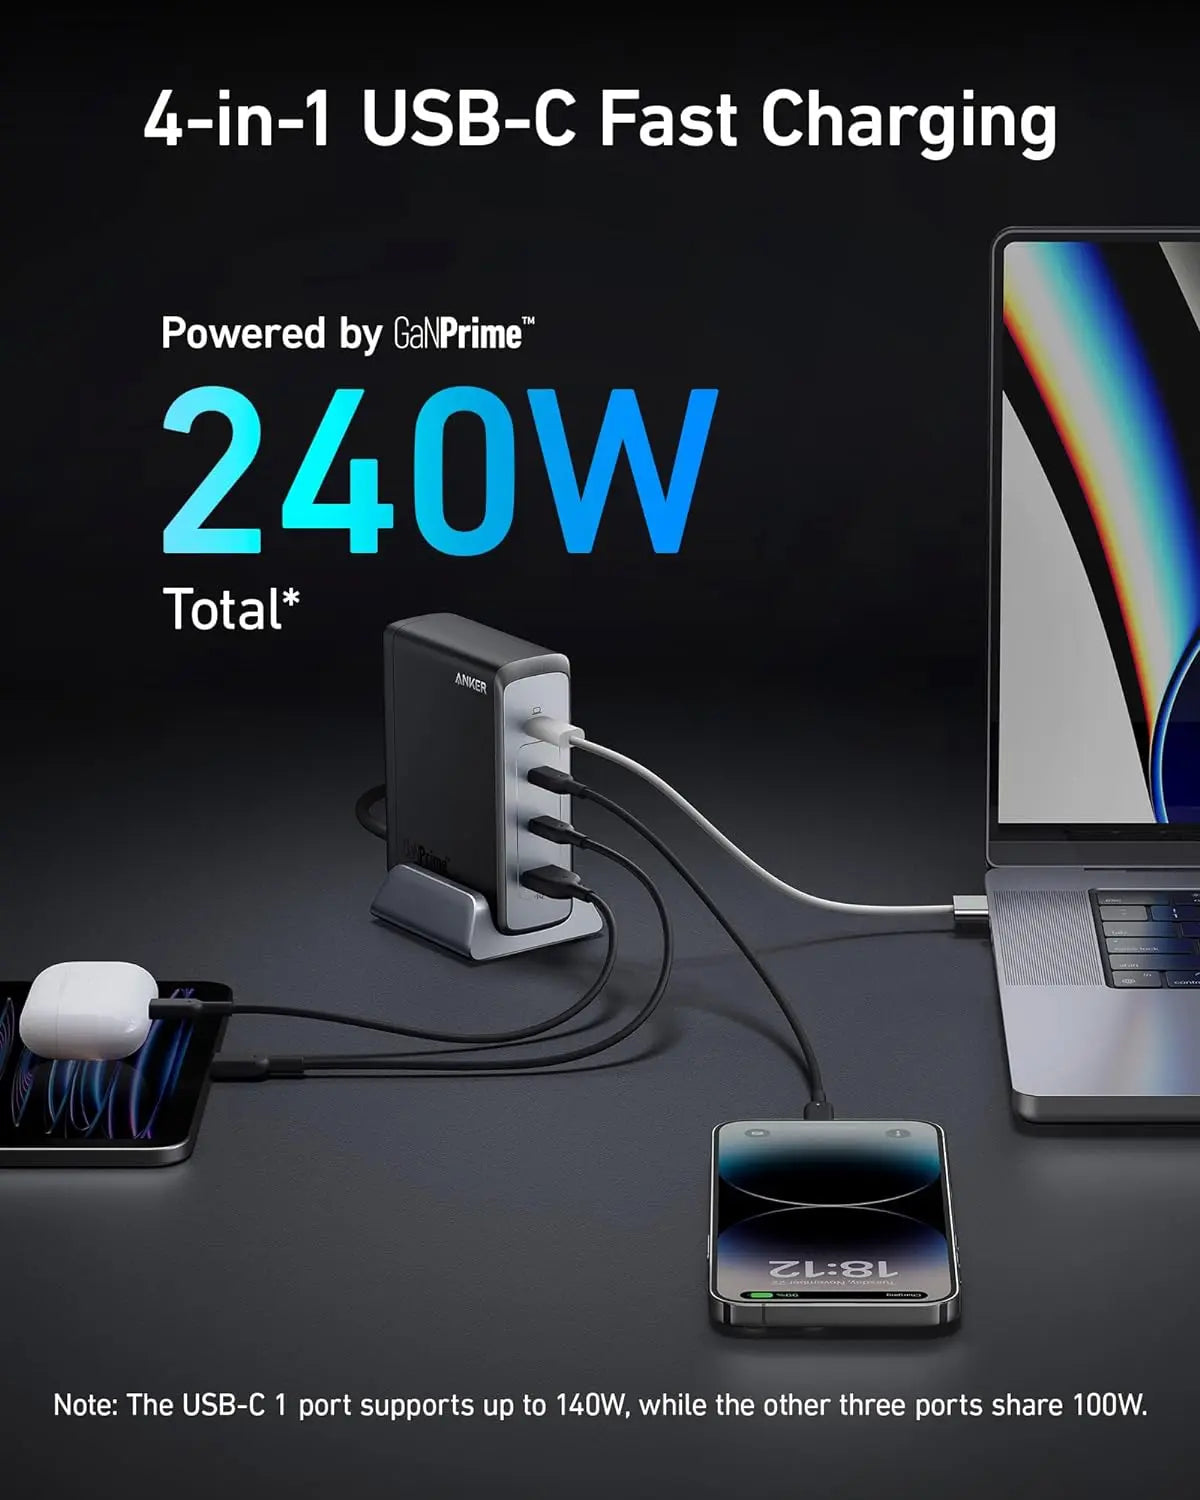 4-in-1 USB-C Fast charging Providing Total 240W Output Fast Charging Powerport Prime 240W USB C GaN Charger A2342 